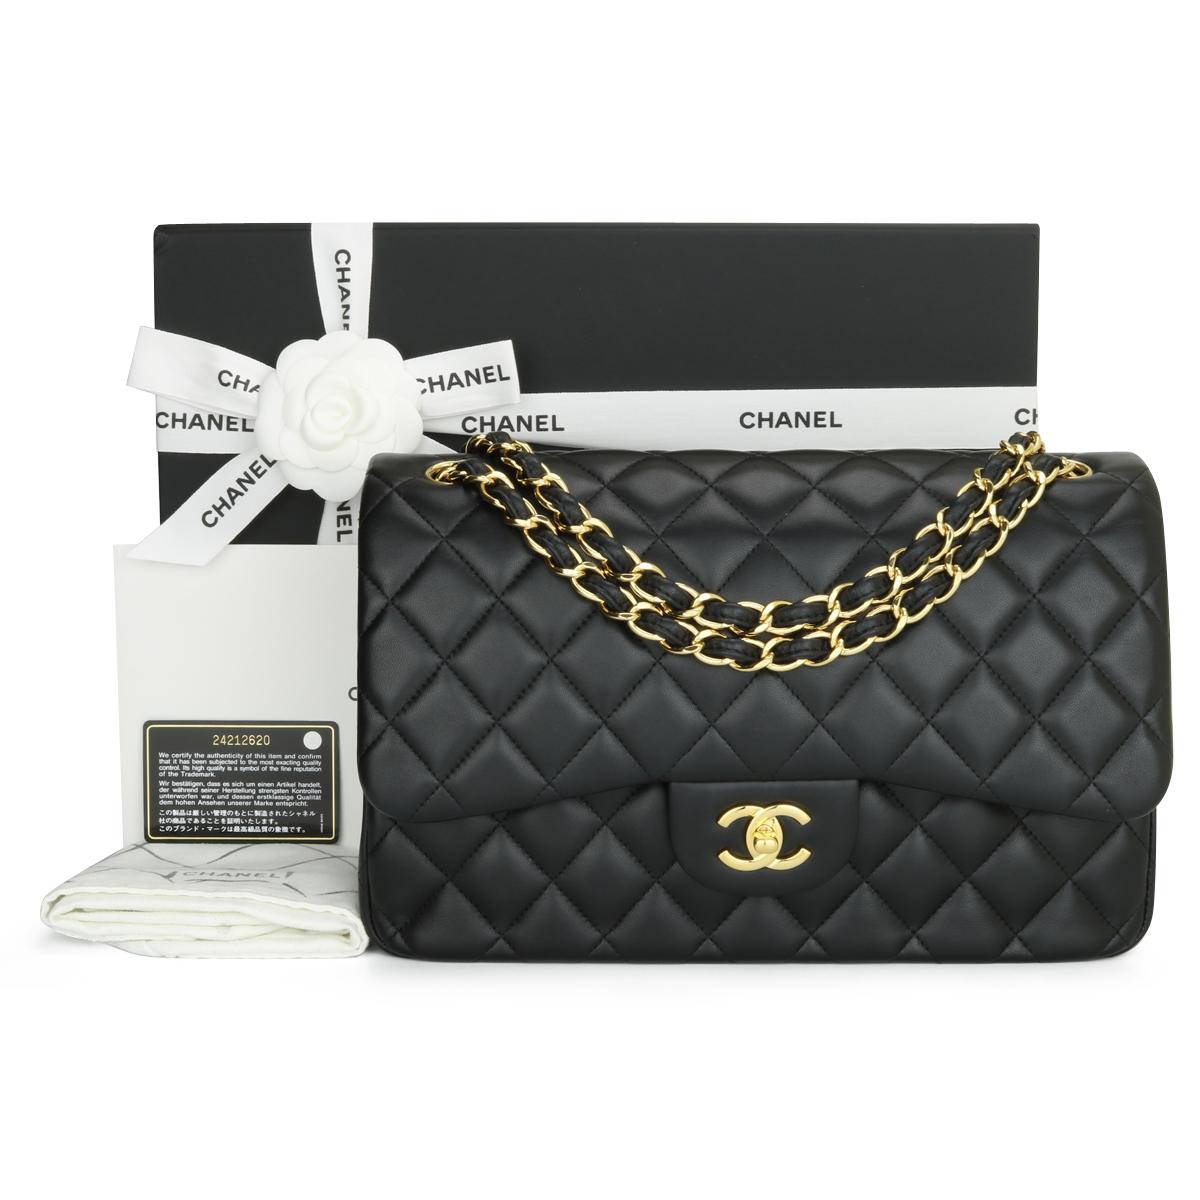 CHANEL Classic Double Flap Jumbo Bag Black Lambskin with Gold Hardware 2018.

This stunning bag is in excellent condition, the bag still holds its original shape, and the hardware is still very shiny. The leather smells fresh as if new.

- Exterior